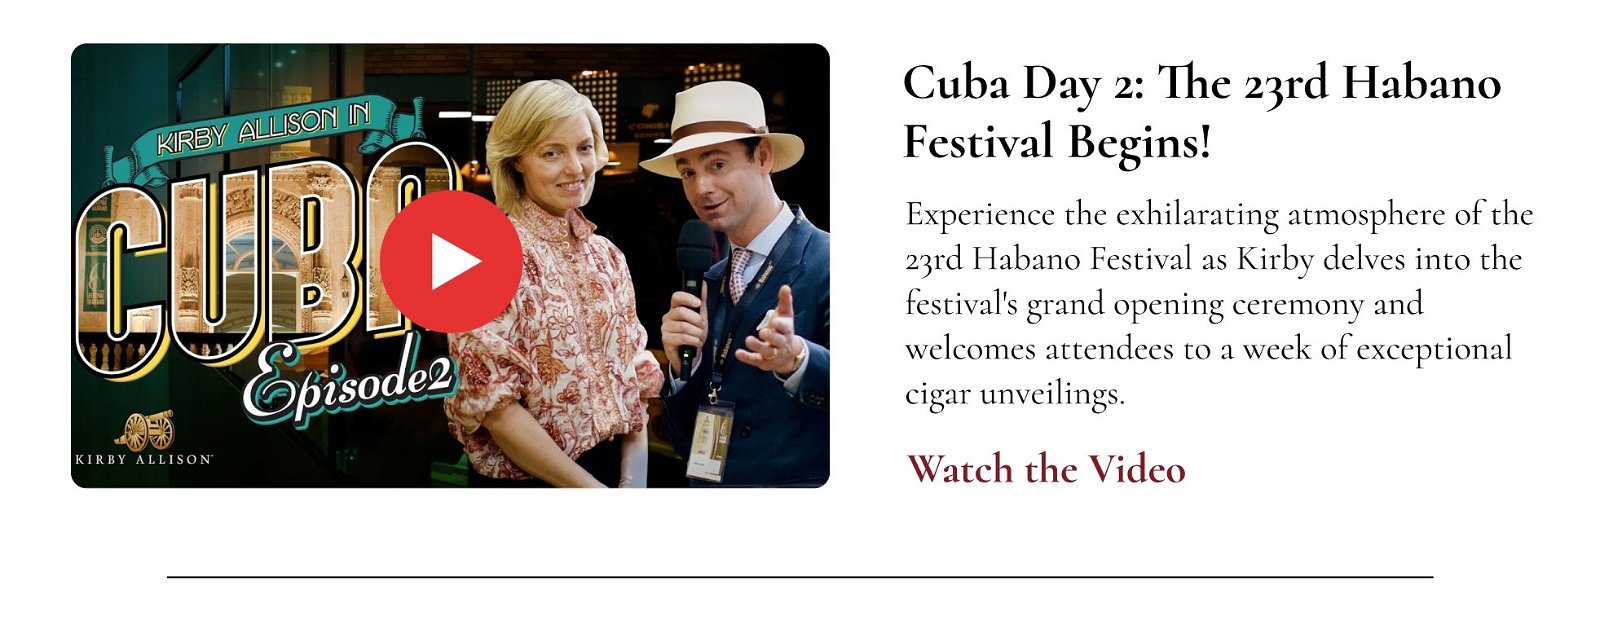 Cuba Day 2: The 23rd Annual Festival del Habanos Begins!